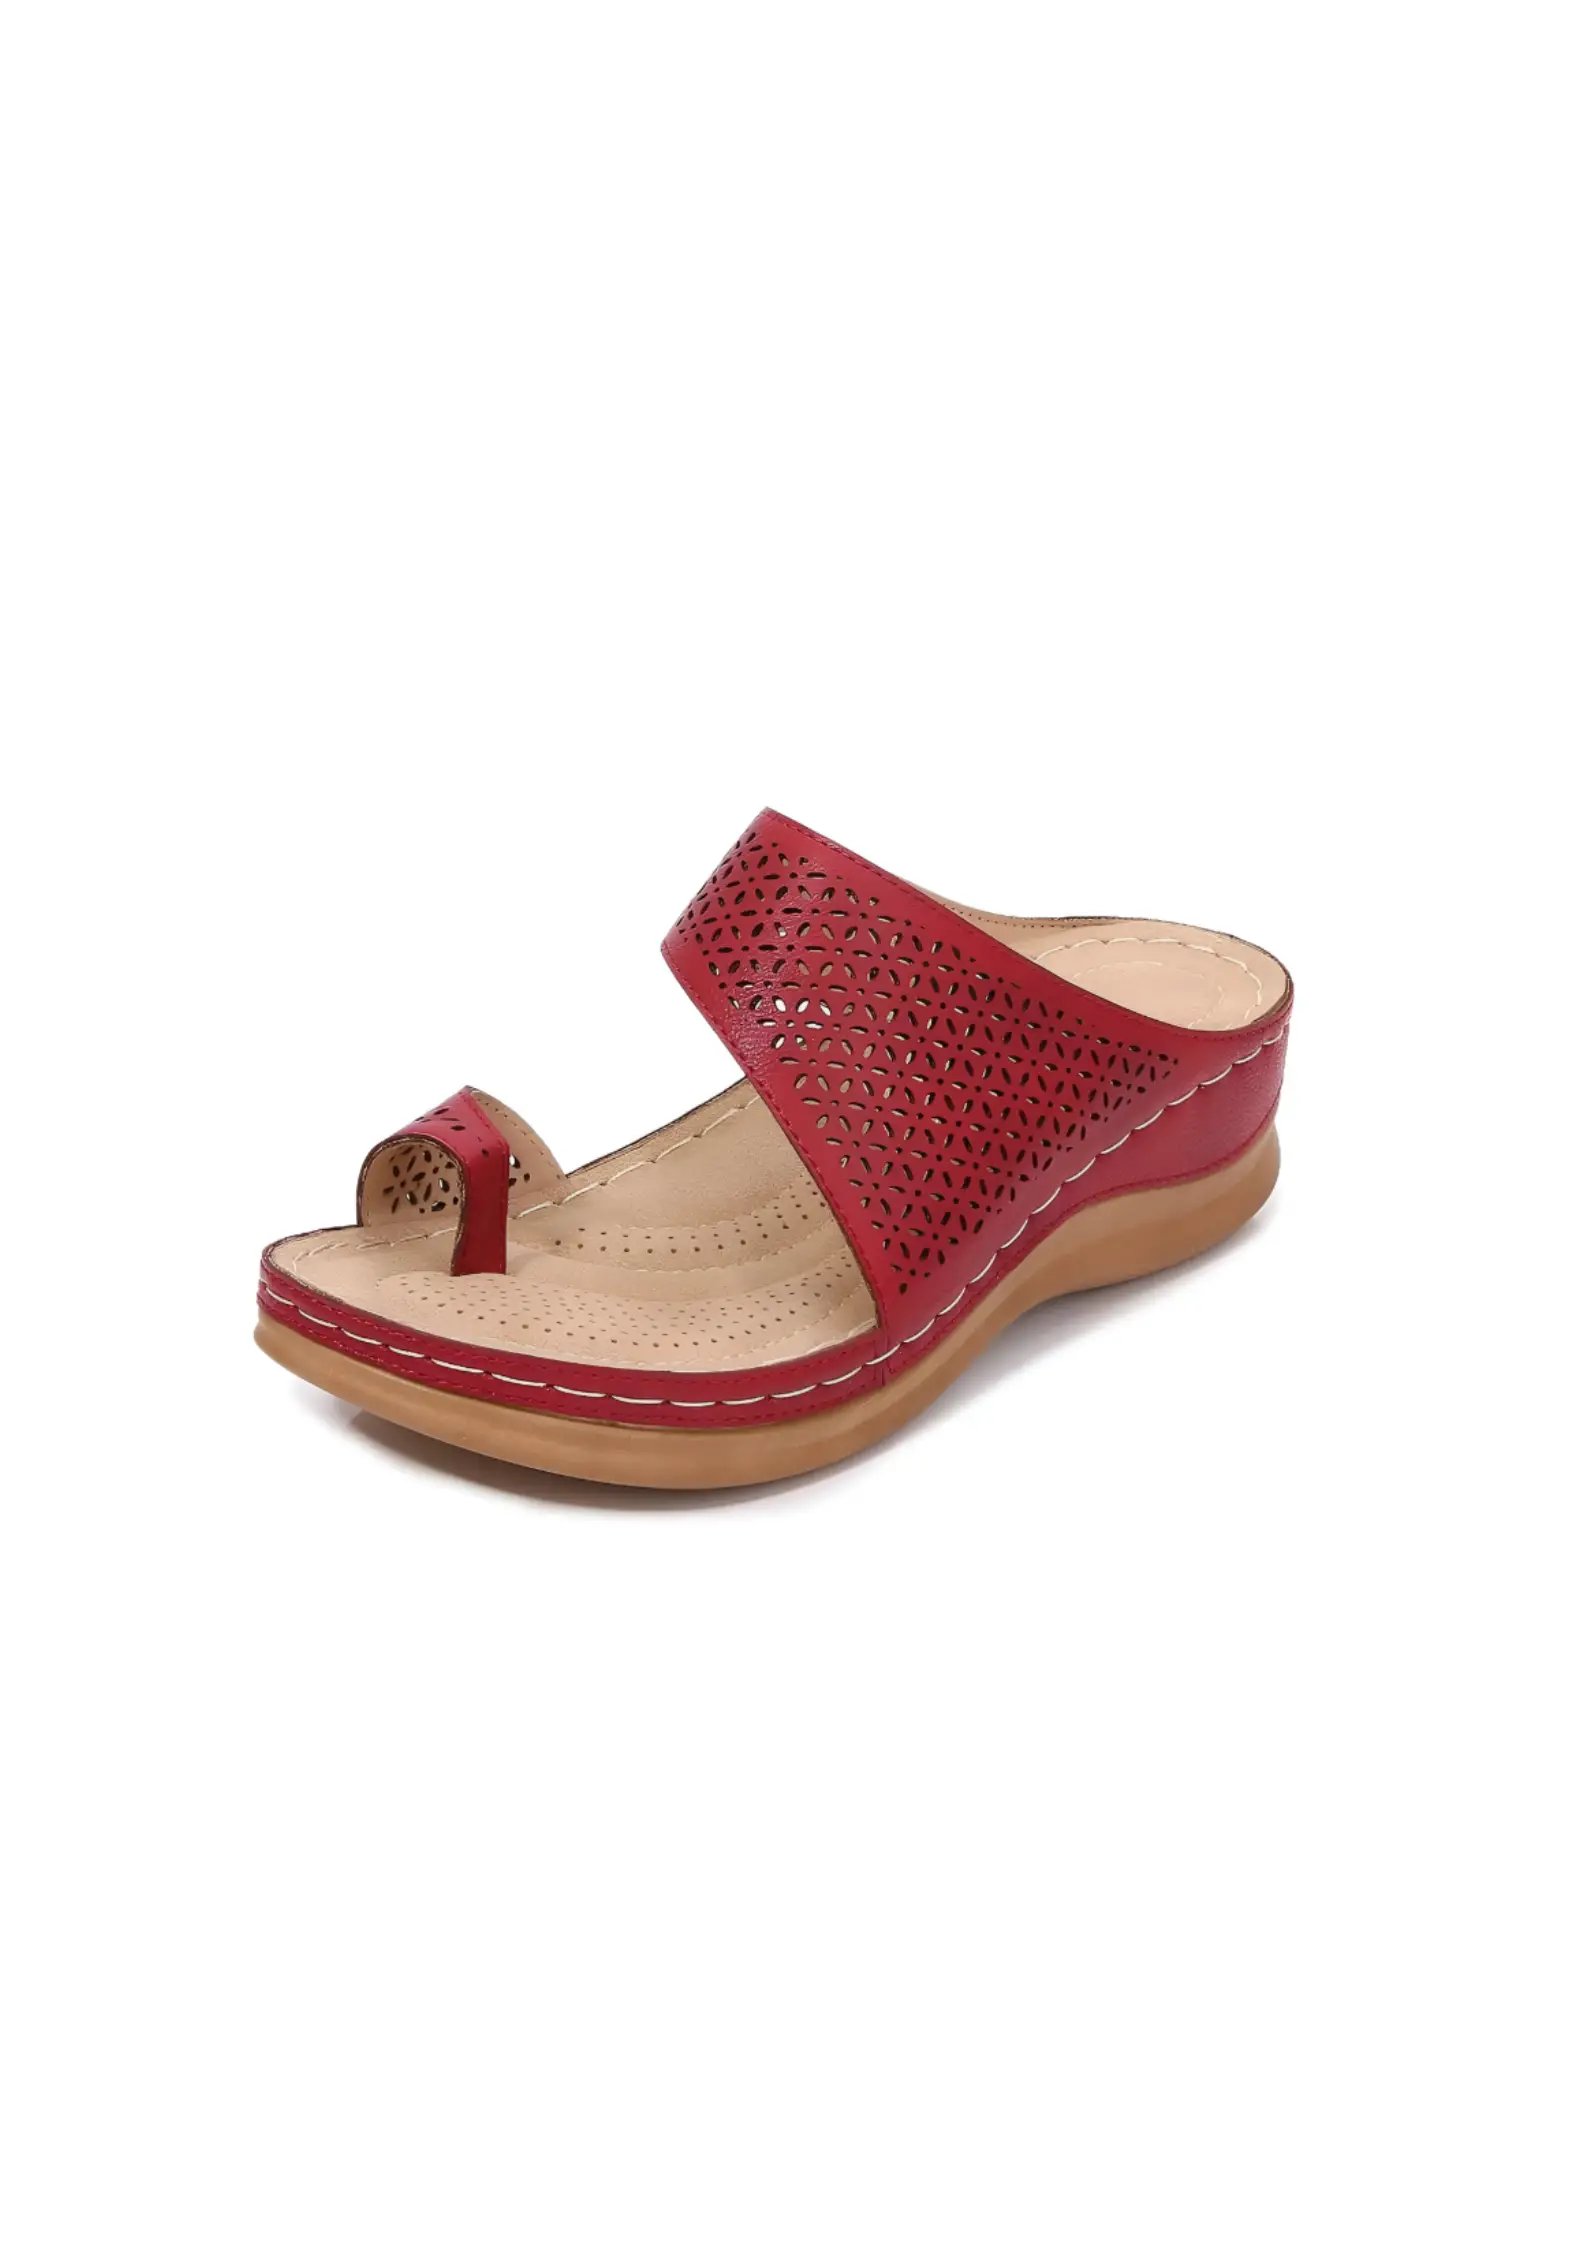 Visit the LAIDIC storeSandals for Women, Bohemian Hollow Wedge Sandals and Slippers for Women